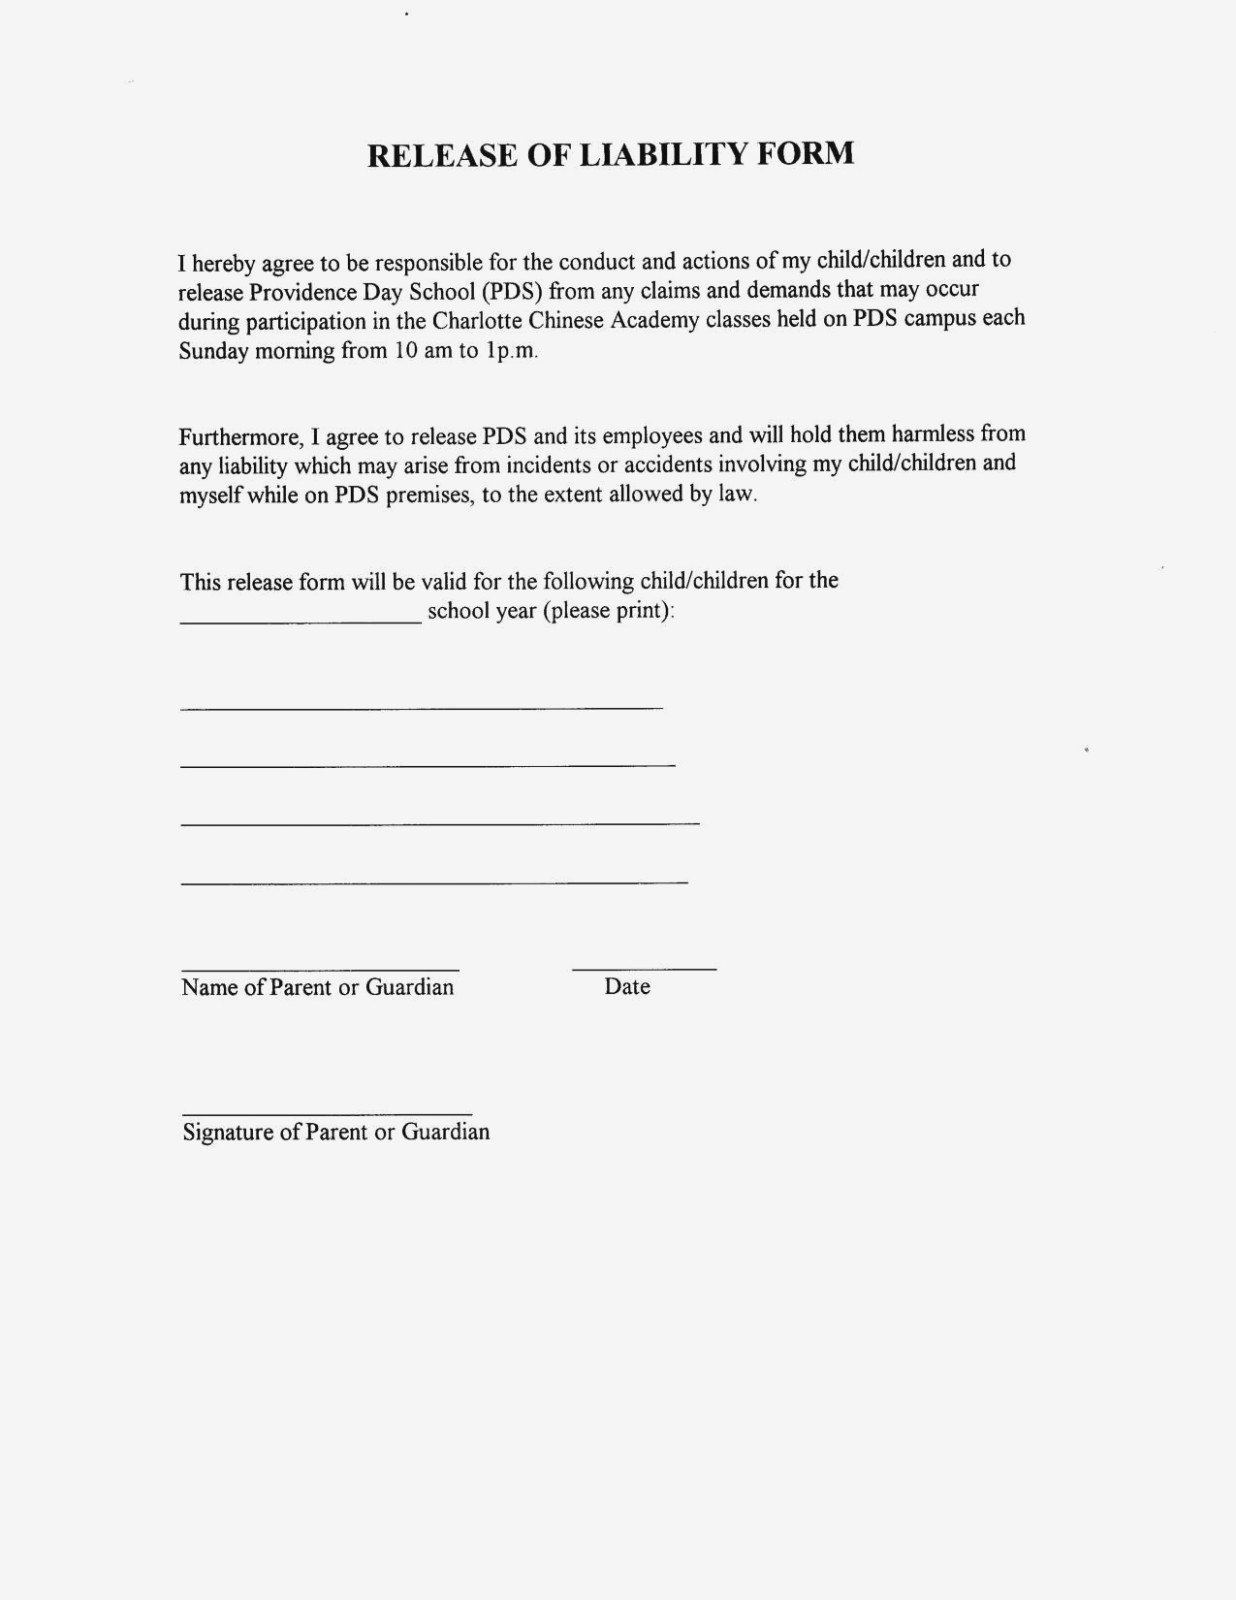 Master Risk Participation Agreement Template Awesome Eur Lex regarding Risk Participation Agreement Template